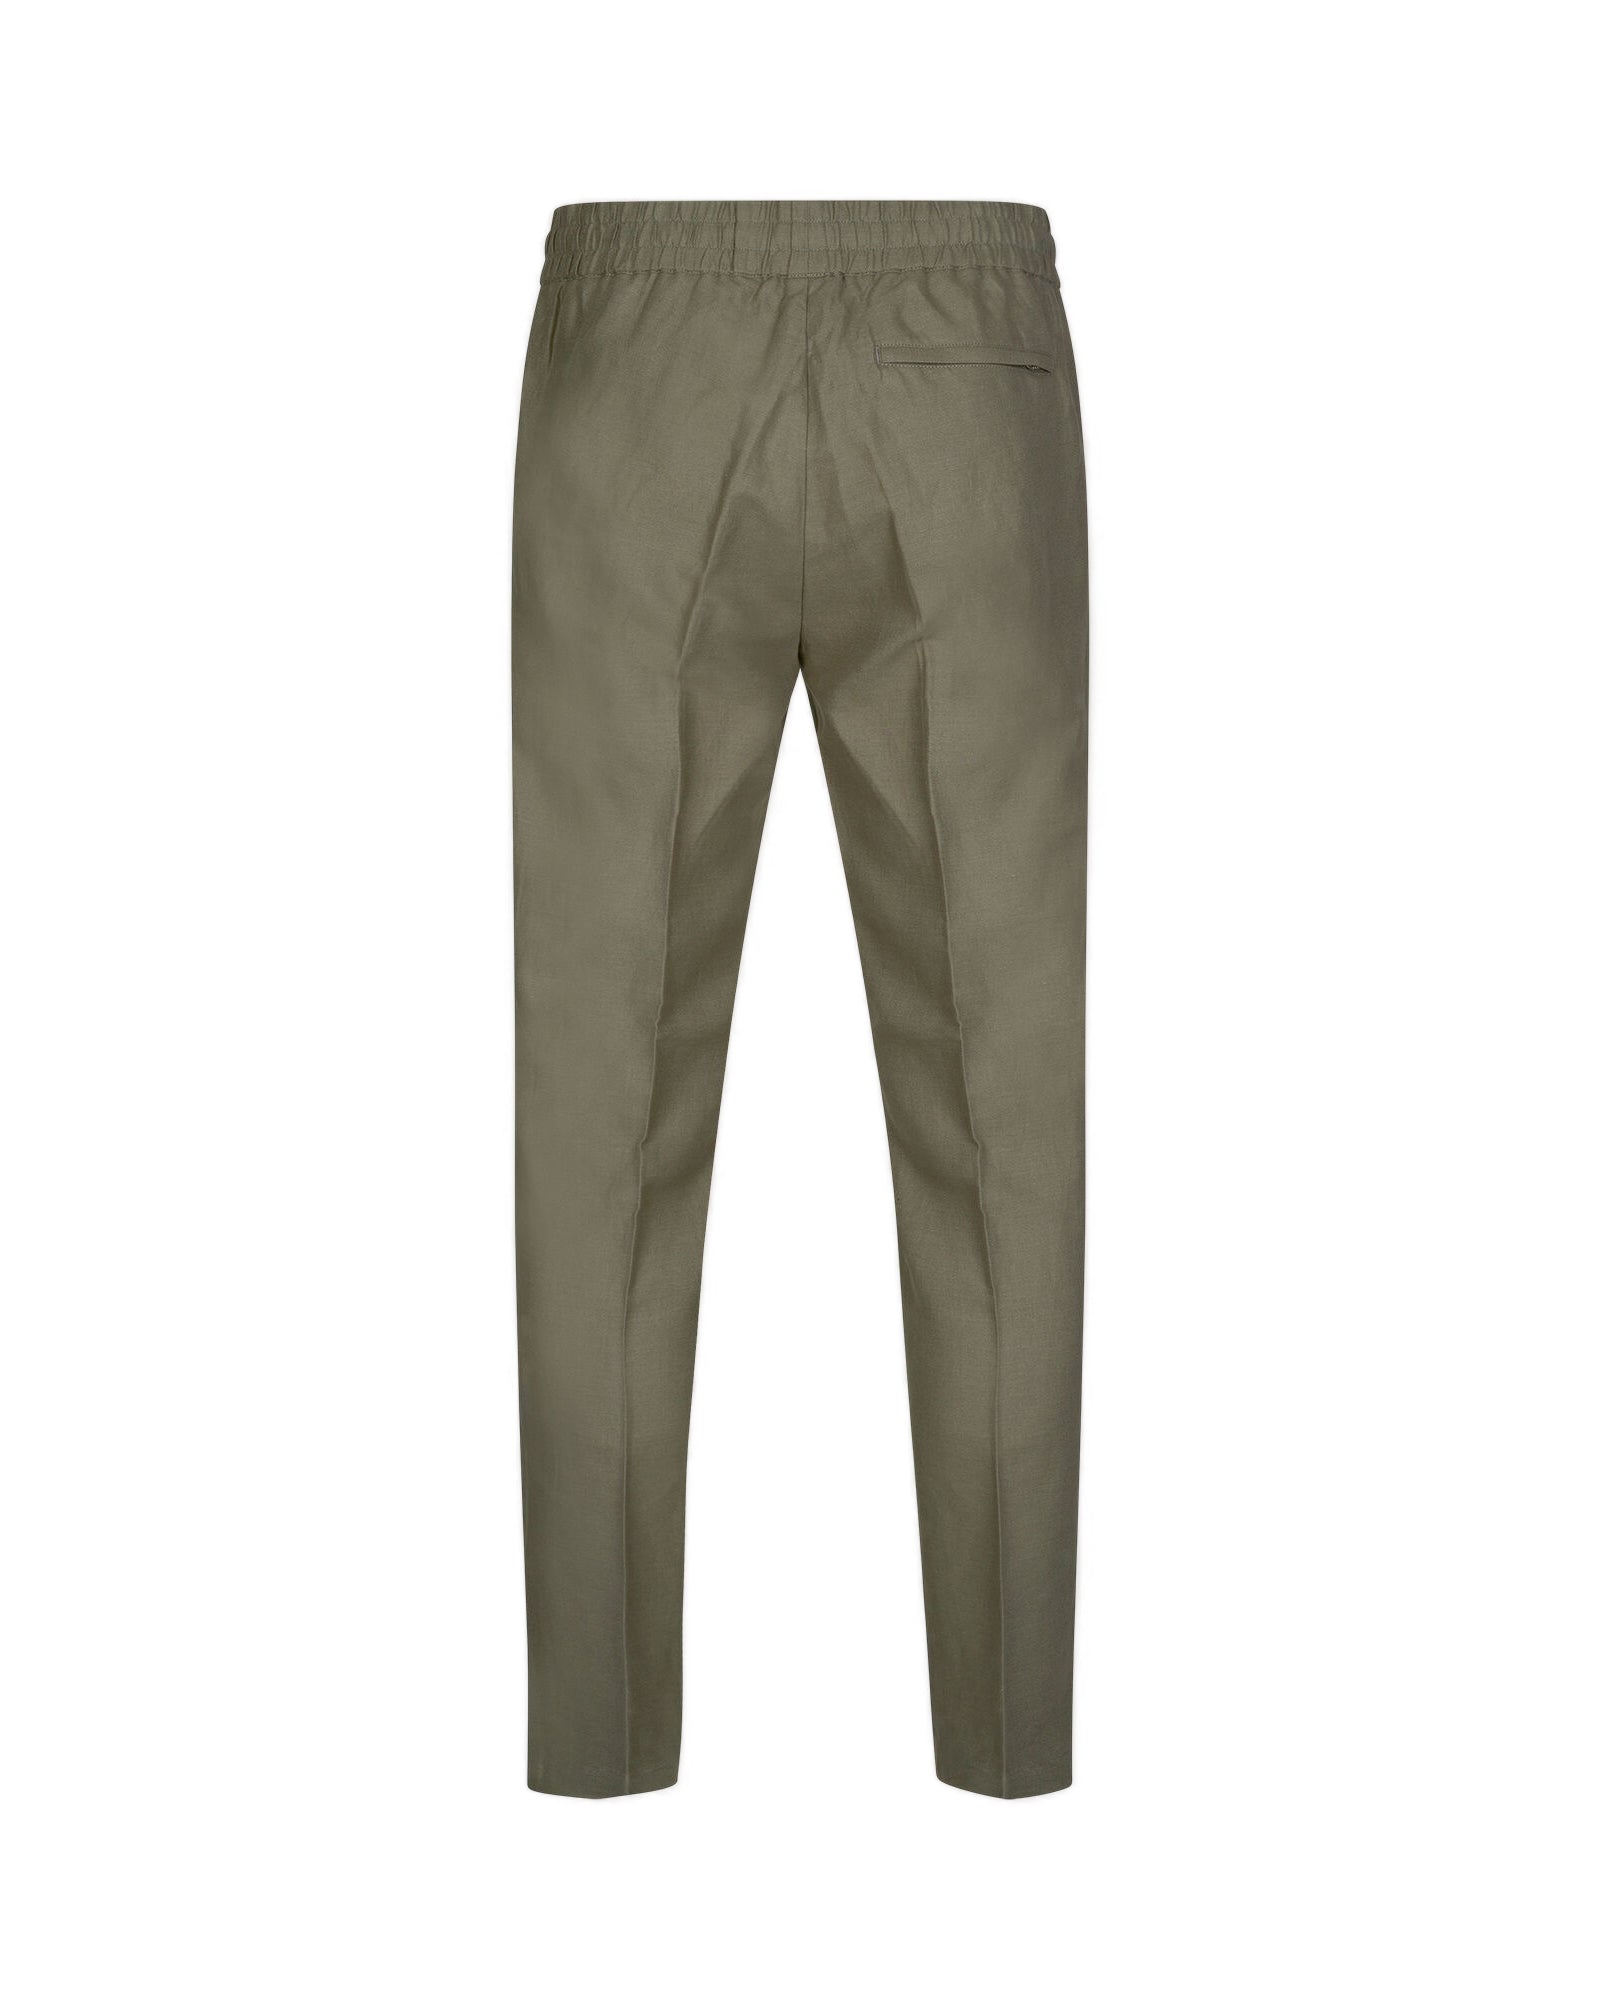 Smithy Trousers 10821 - Dusty Olive